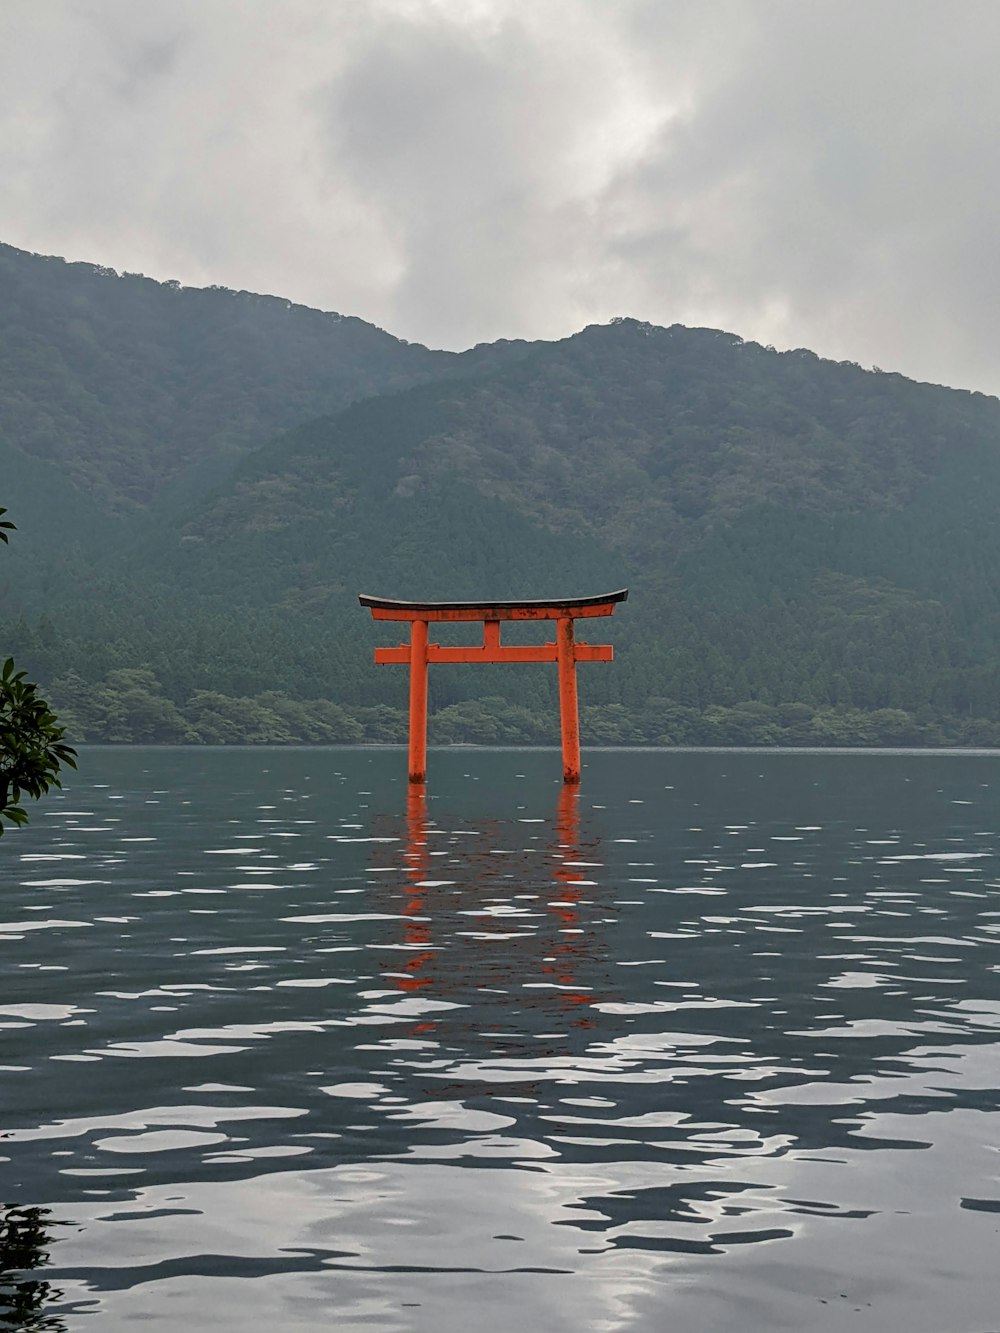 a large wooden structure in a body of water with mountains in the background